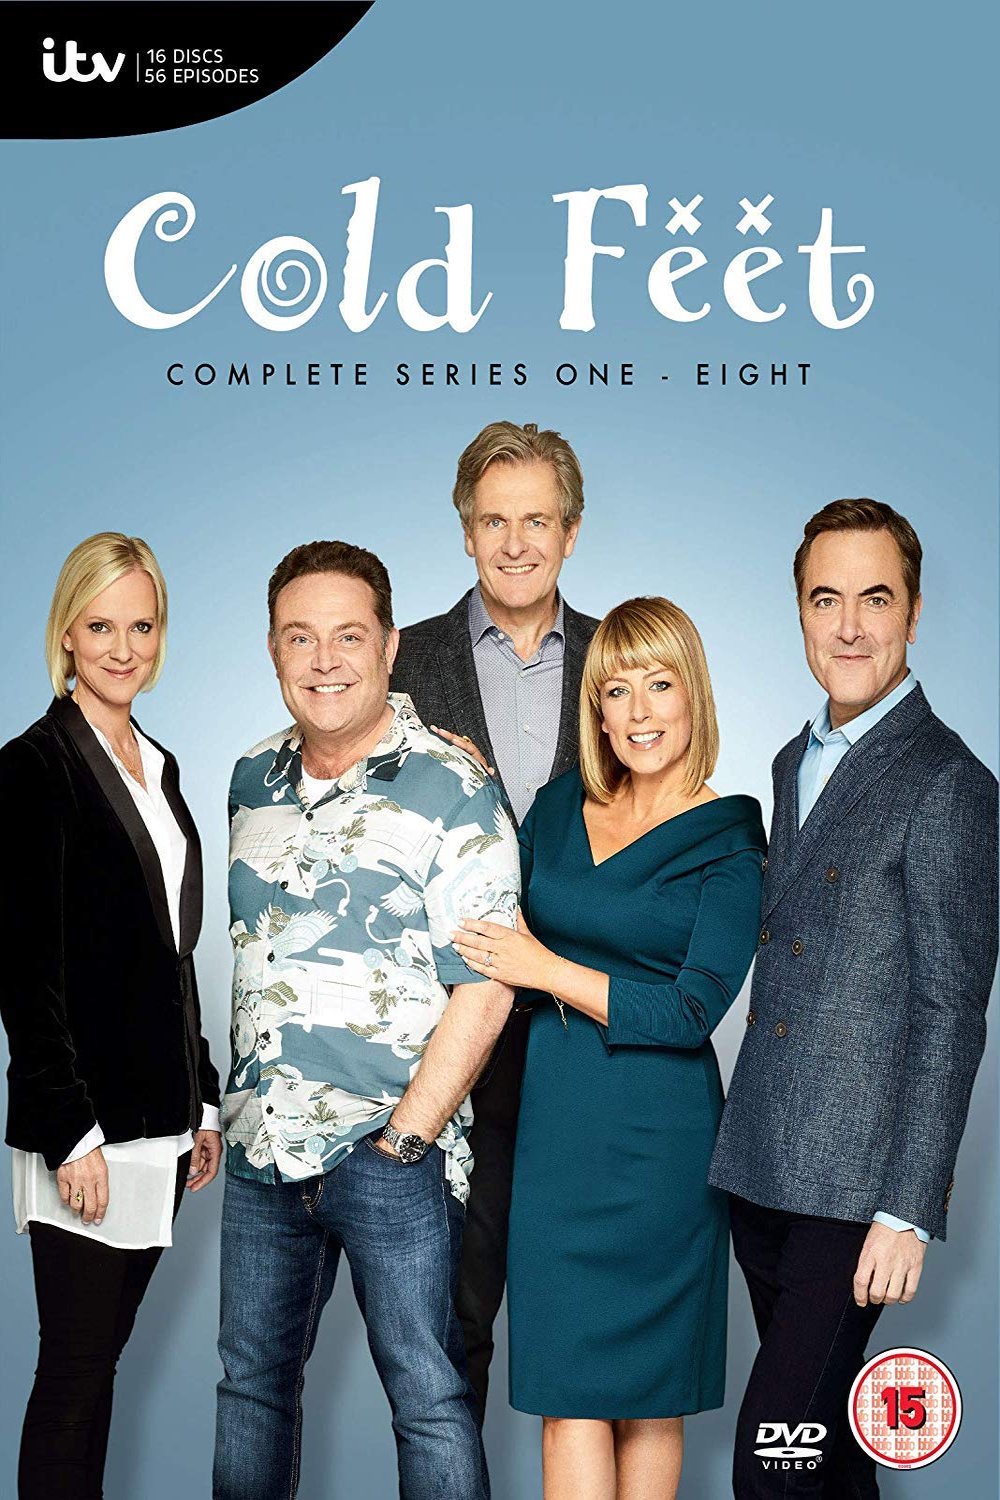 Poster of the movie Cold Feet